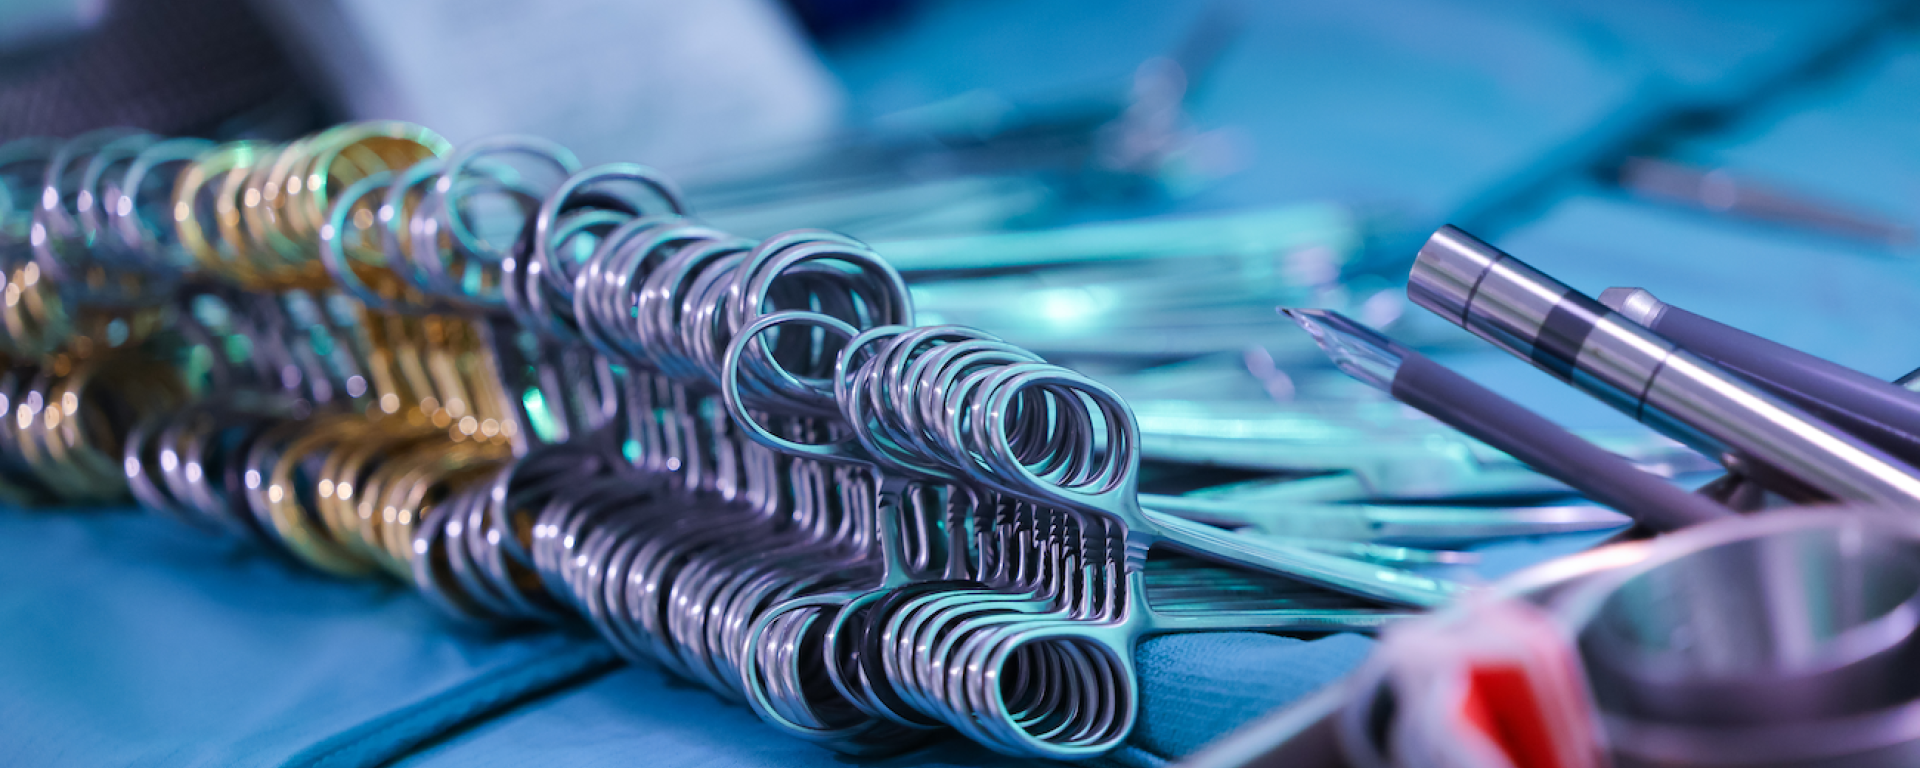 Close up of surgical tools